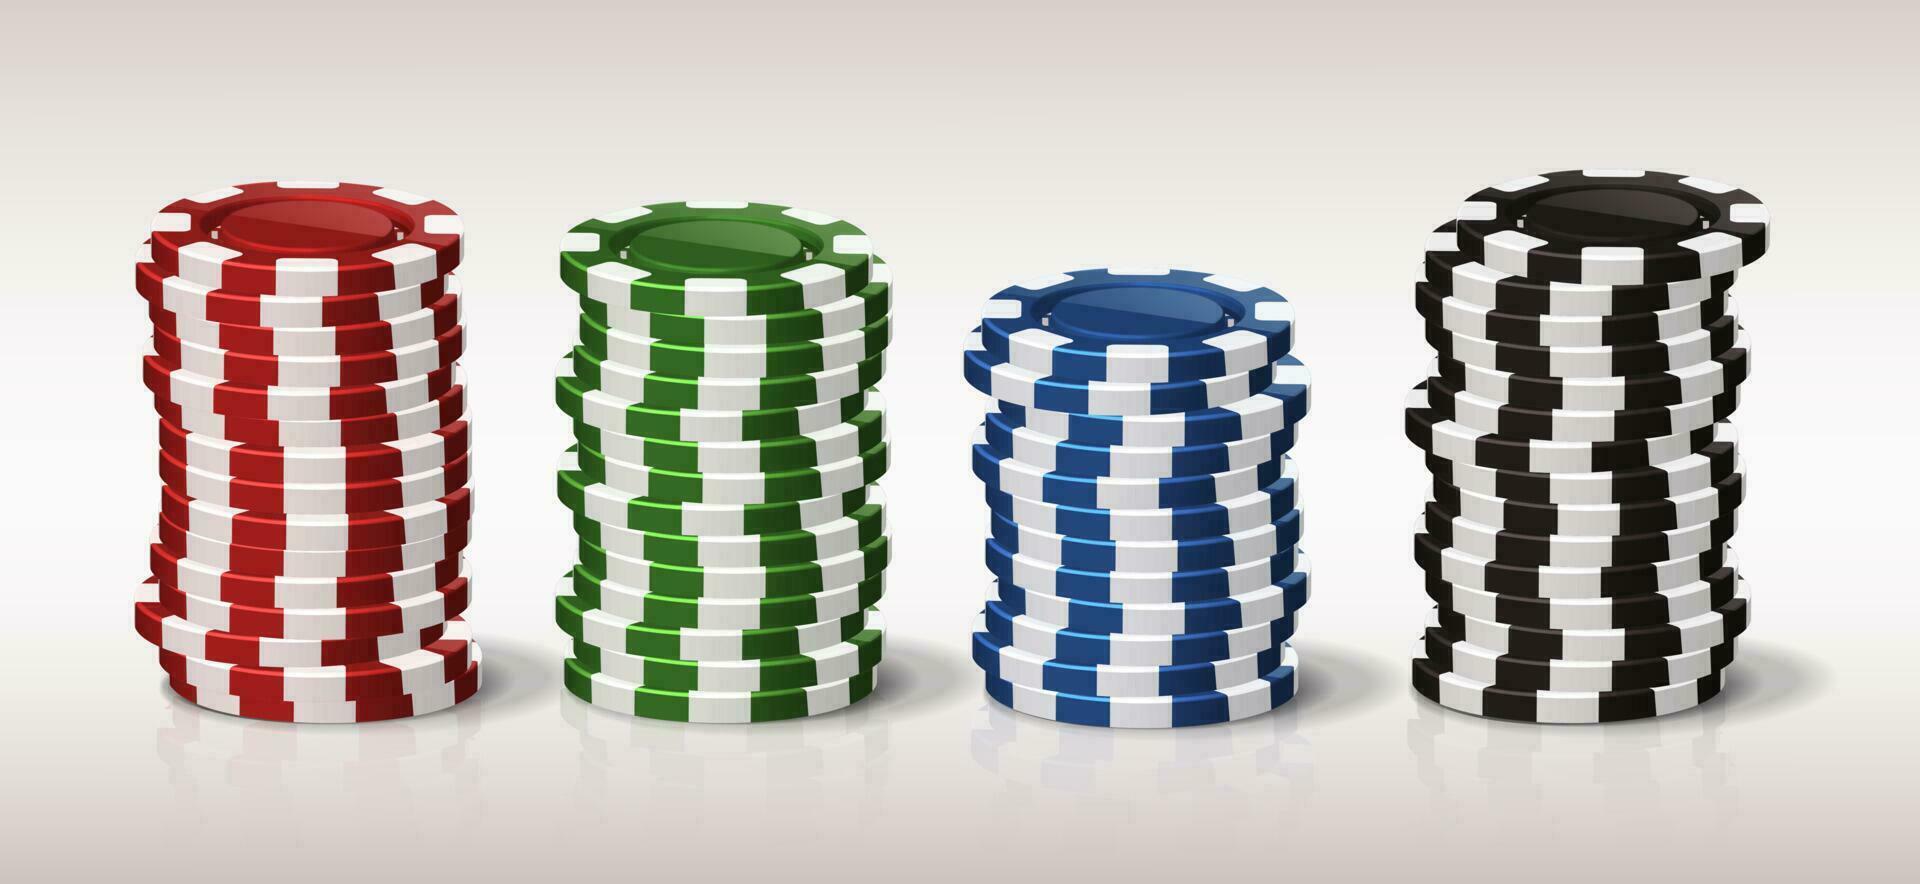 3d realistic vector icon illustration. Poker chips stack in different colors. Casino game money tokens.